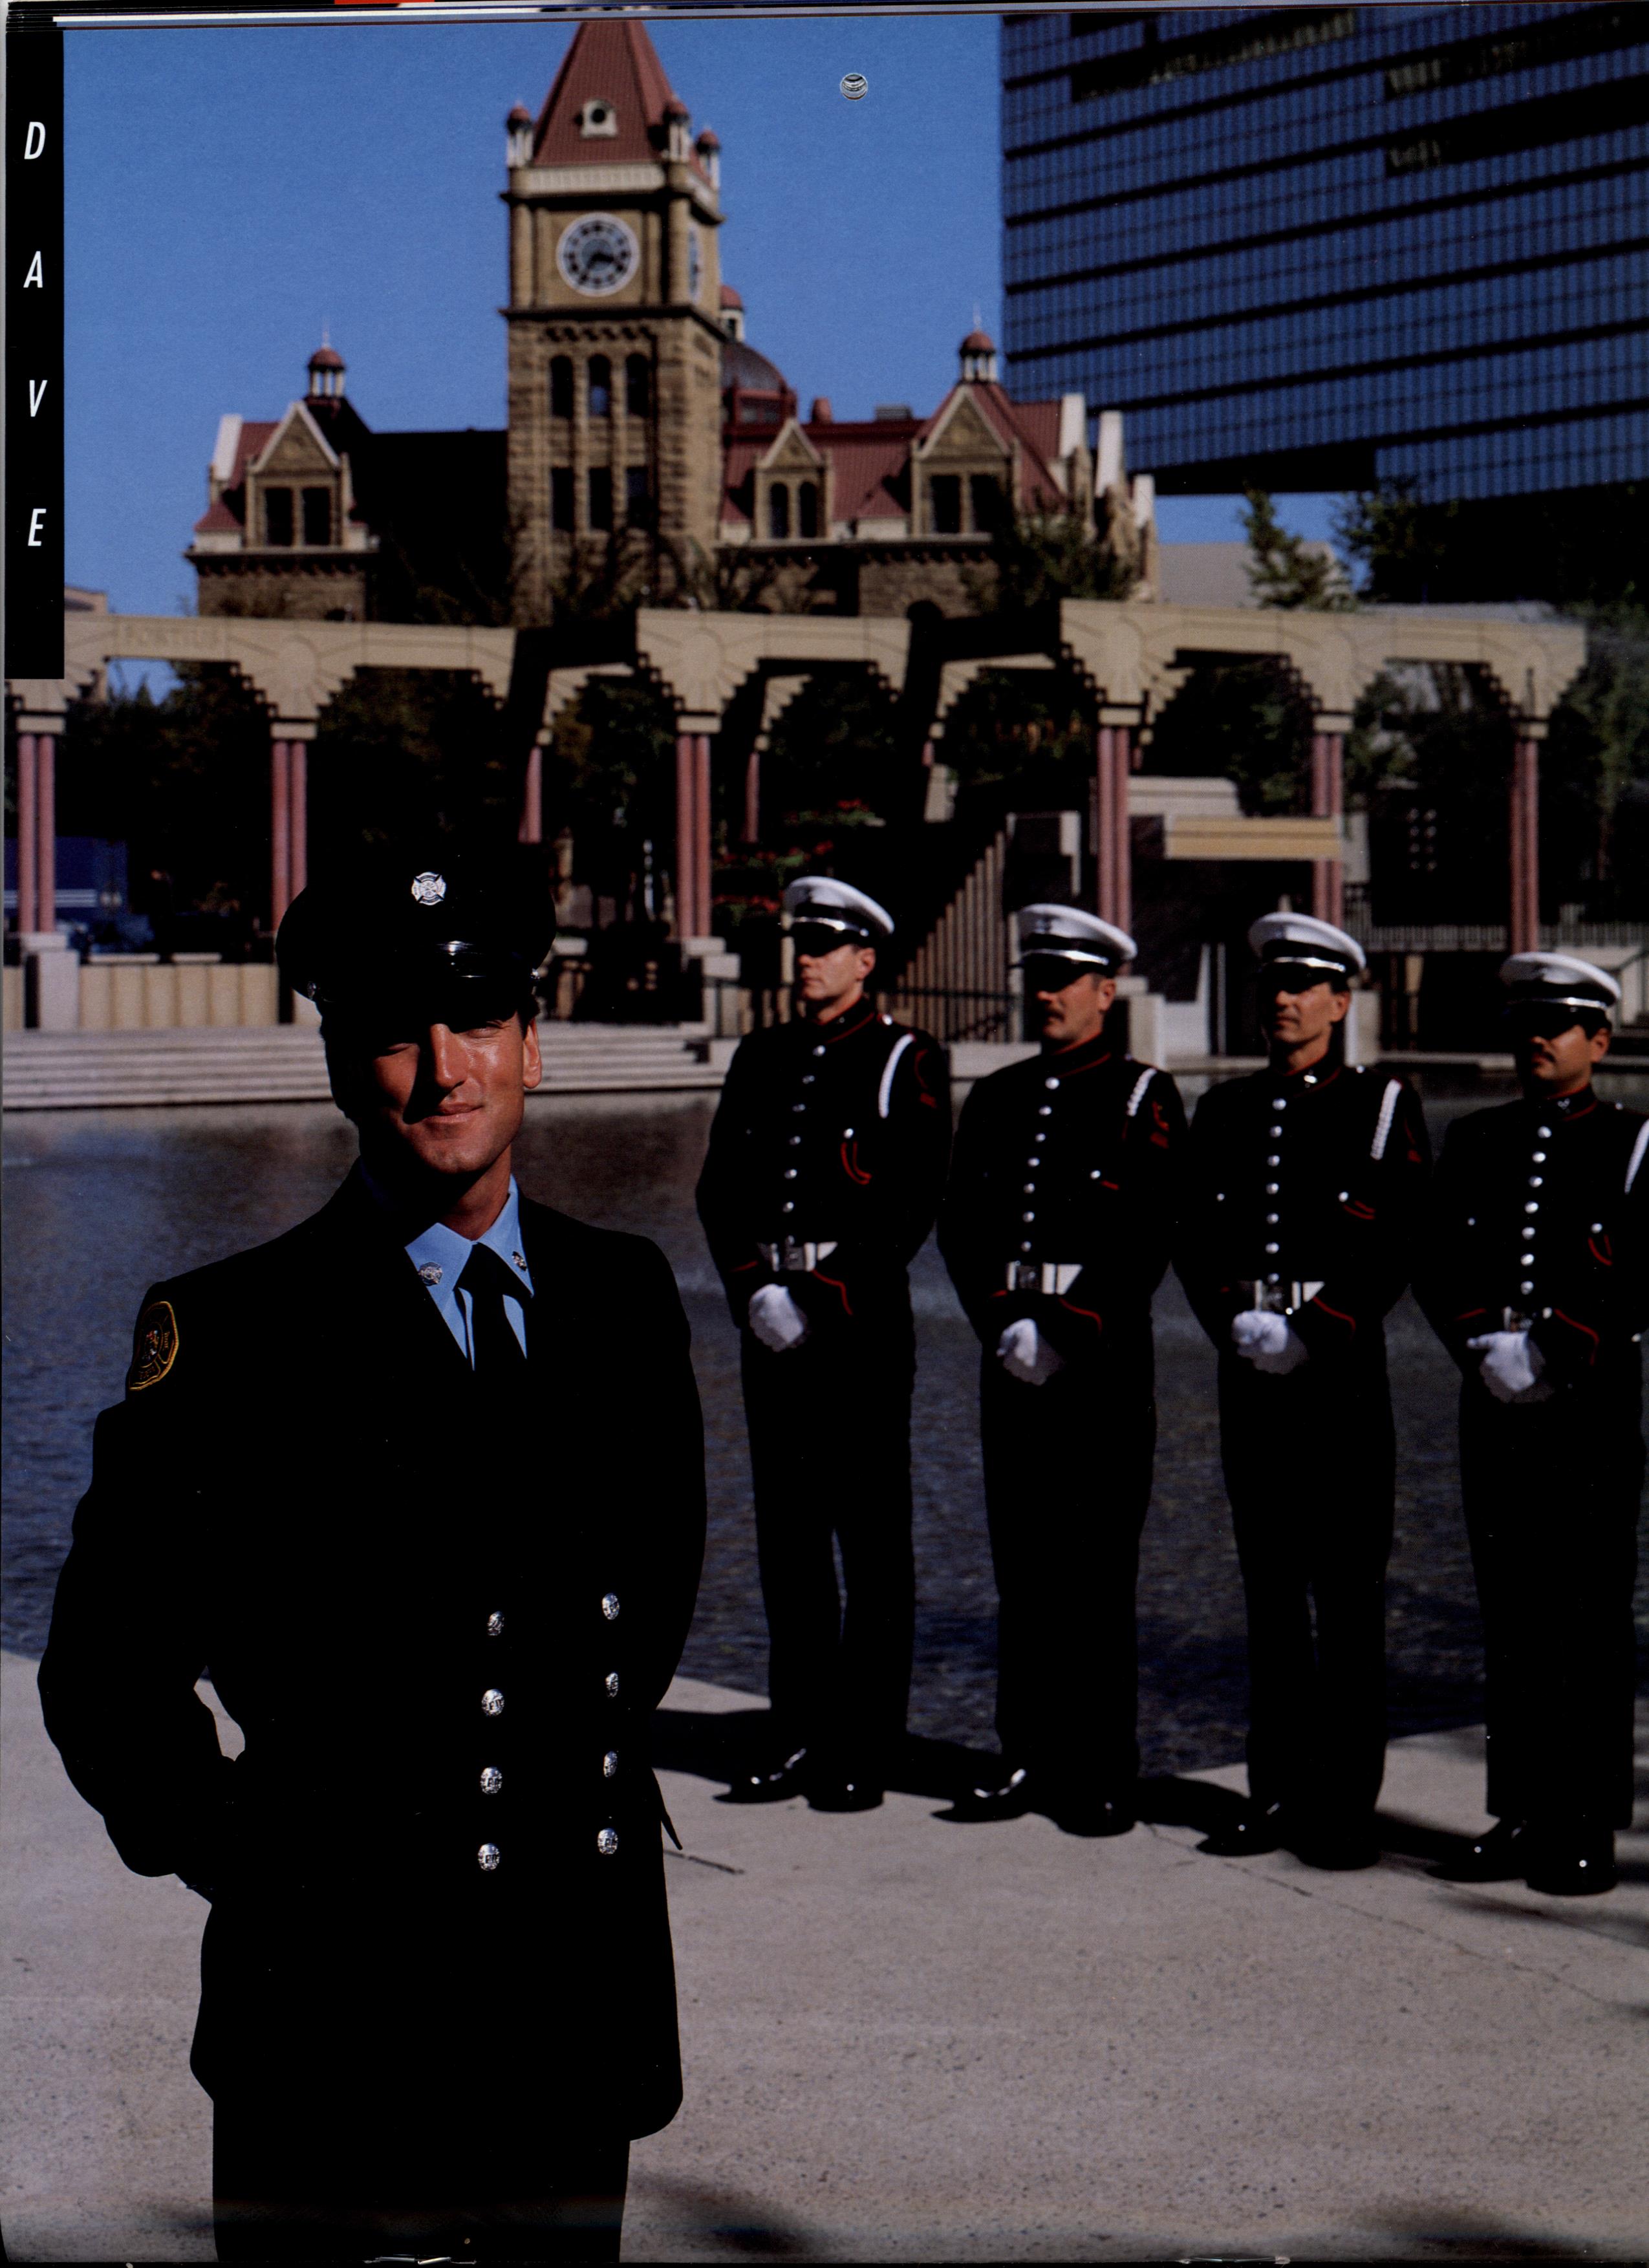 A firefighter stands in the left foreground, with four Honour Guard members standing at attention mid ground. In the background is Olympic Plaza and historic sandstone city hall.